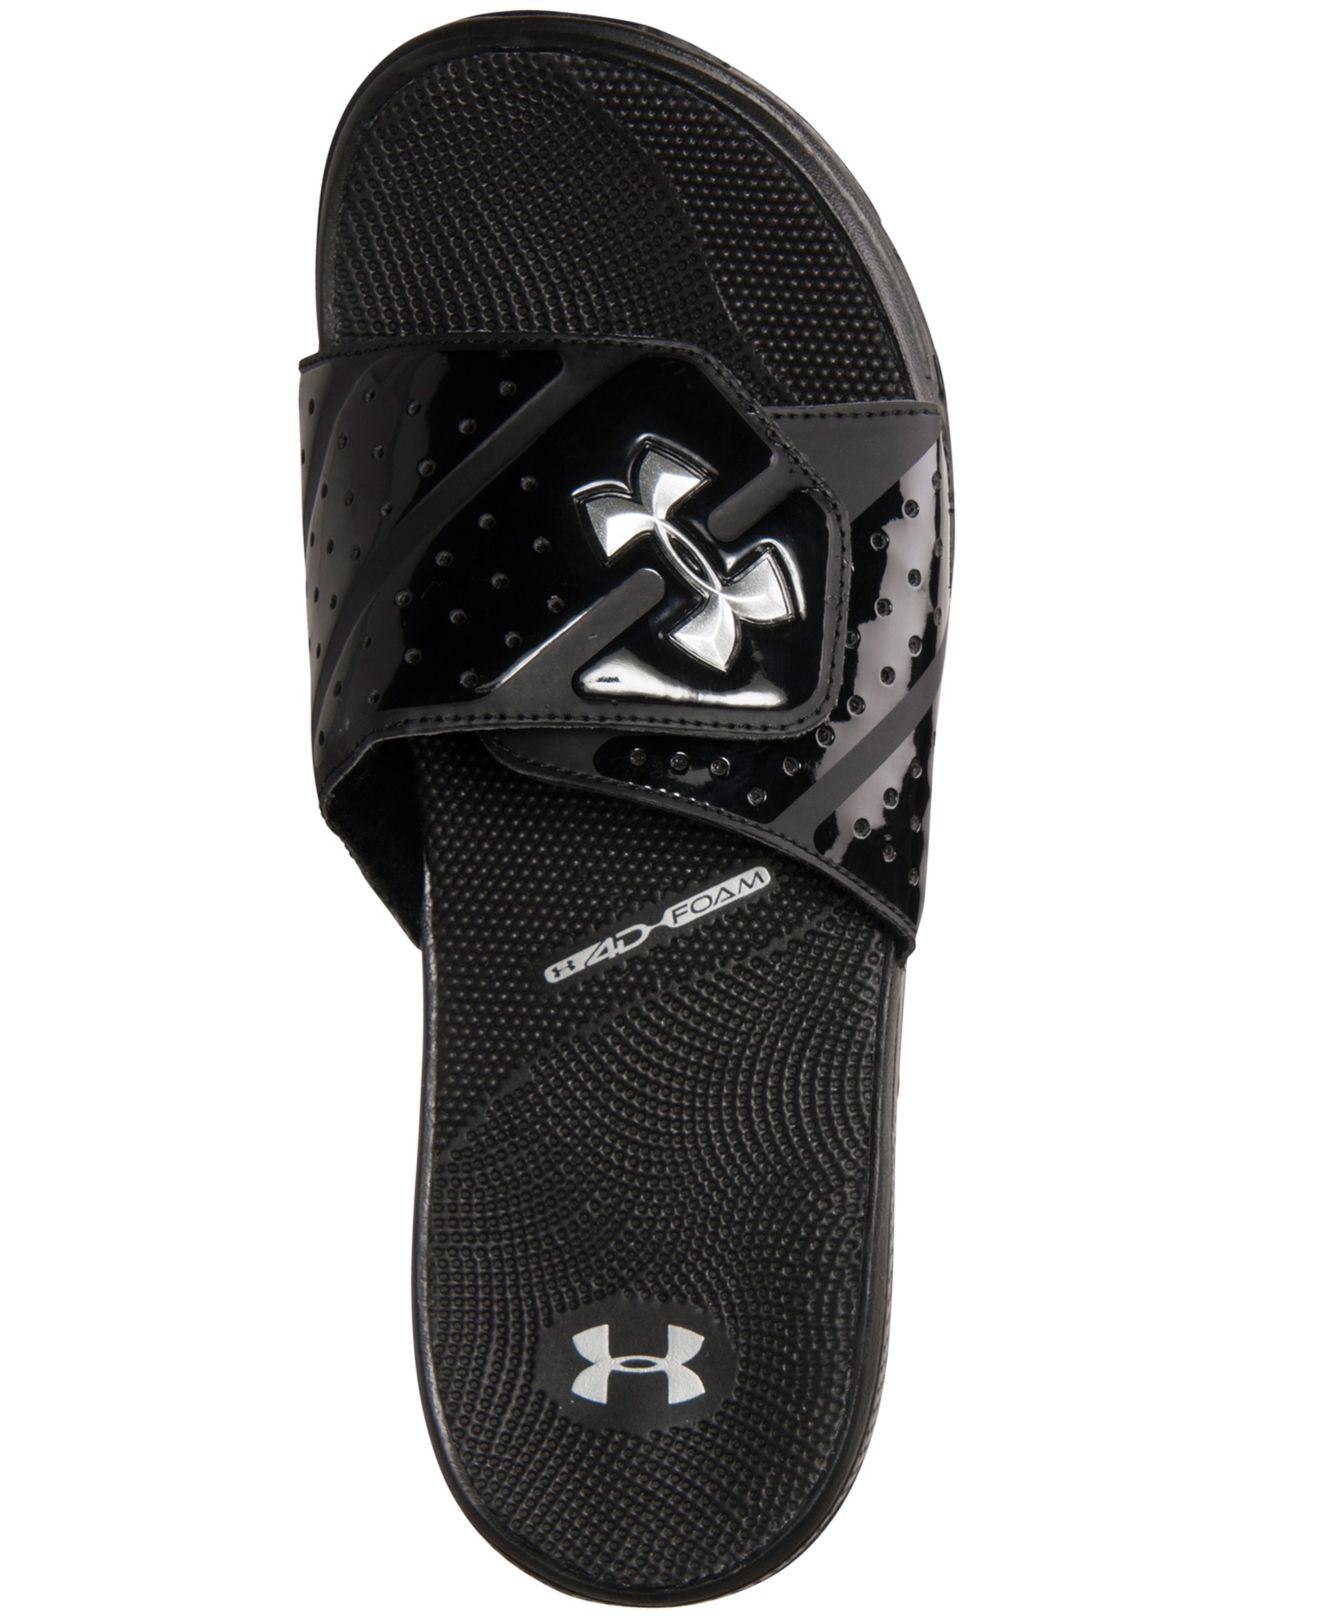 Lyst - Under Armour Men's Micro G Slide Sandals From Finish Line in ...